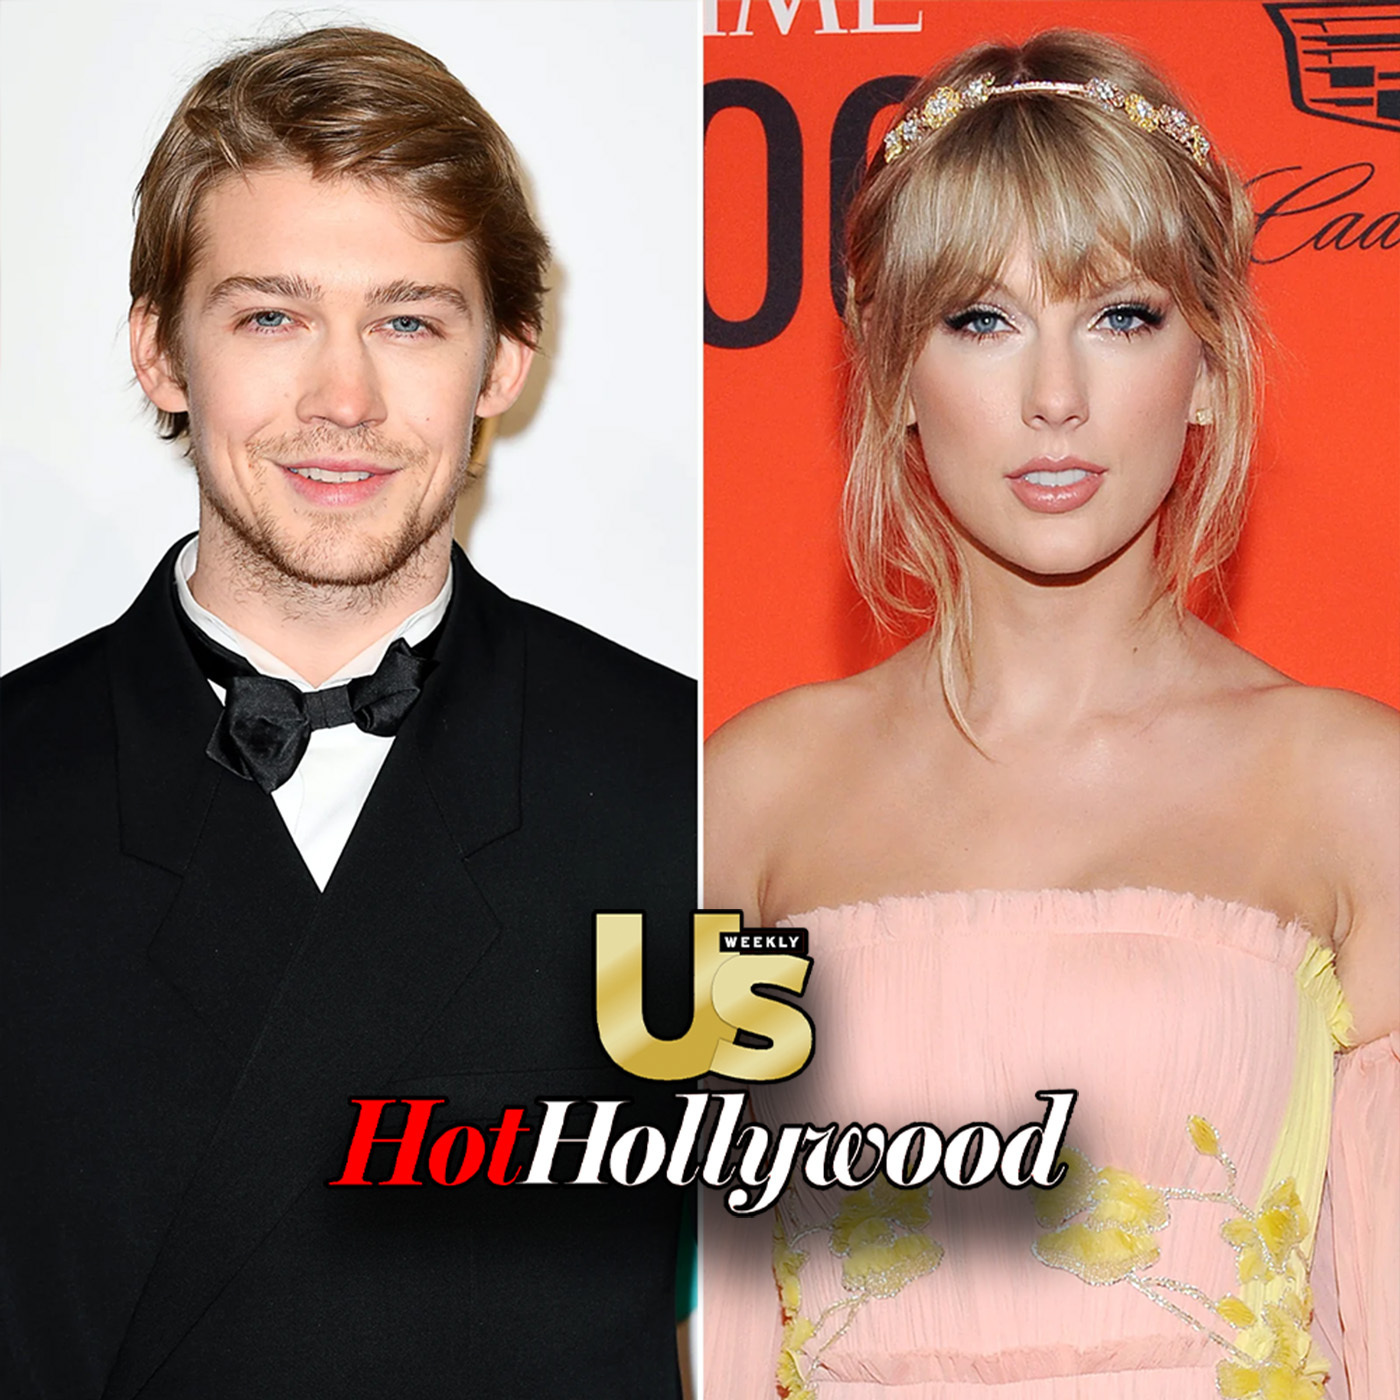 Taylor Swift and Joe Alwyn Break Up: What We Know So Far, Megan Fox and MGK Back Together After Hawaii Trip, and Britney Spears’ Bombshell Memoir